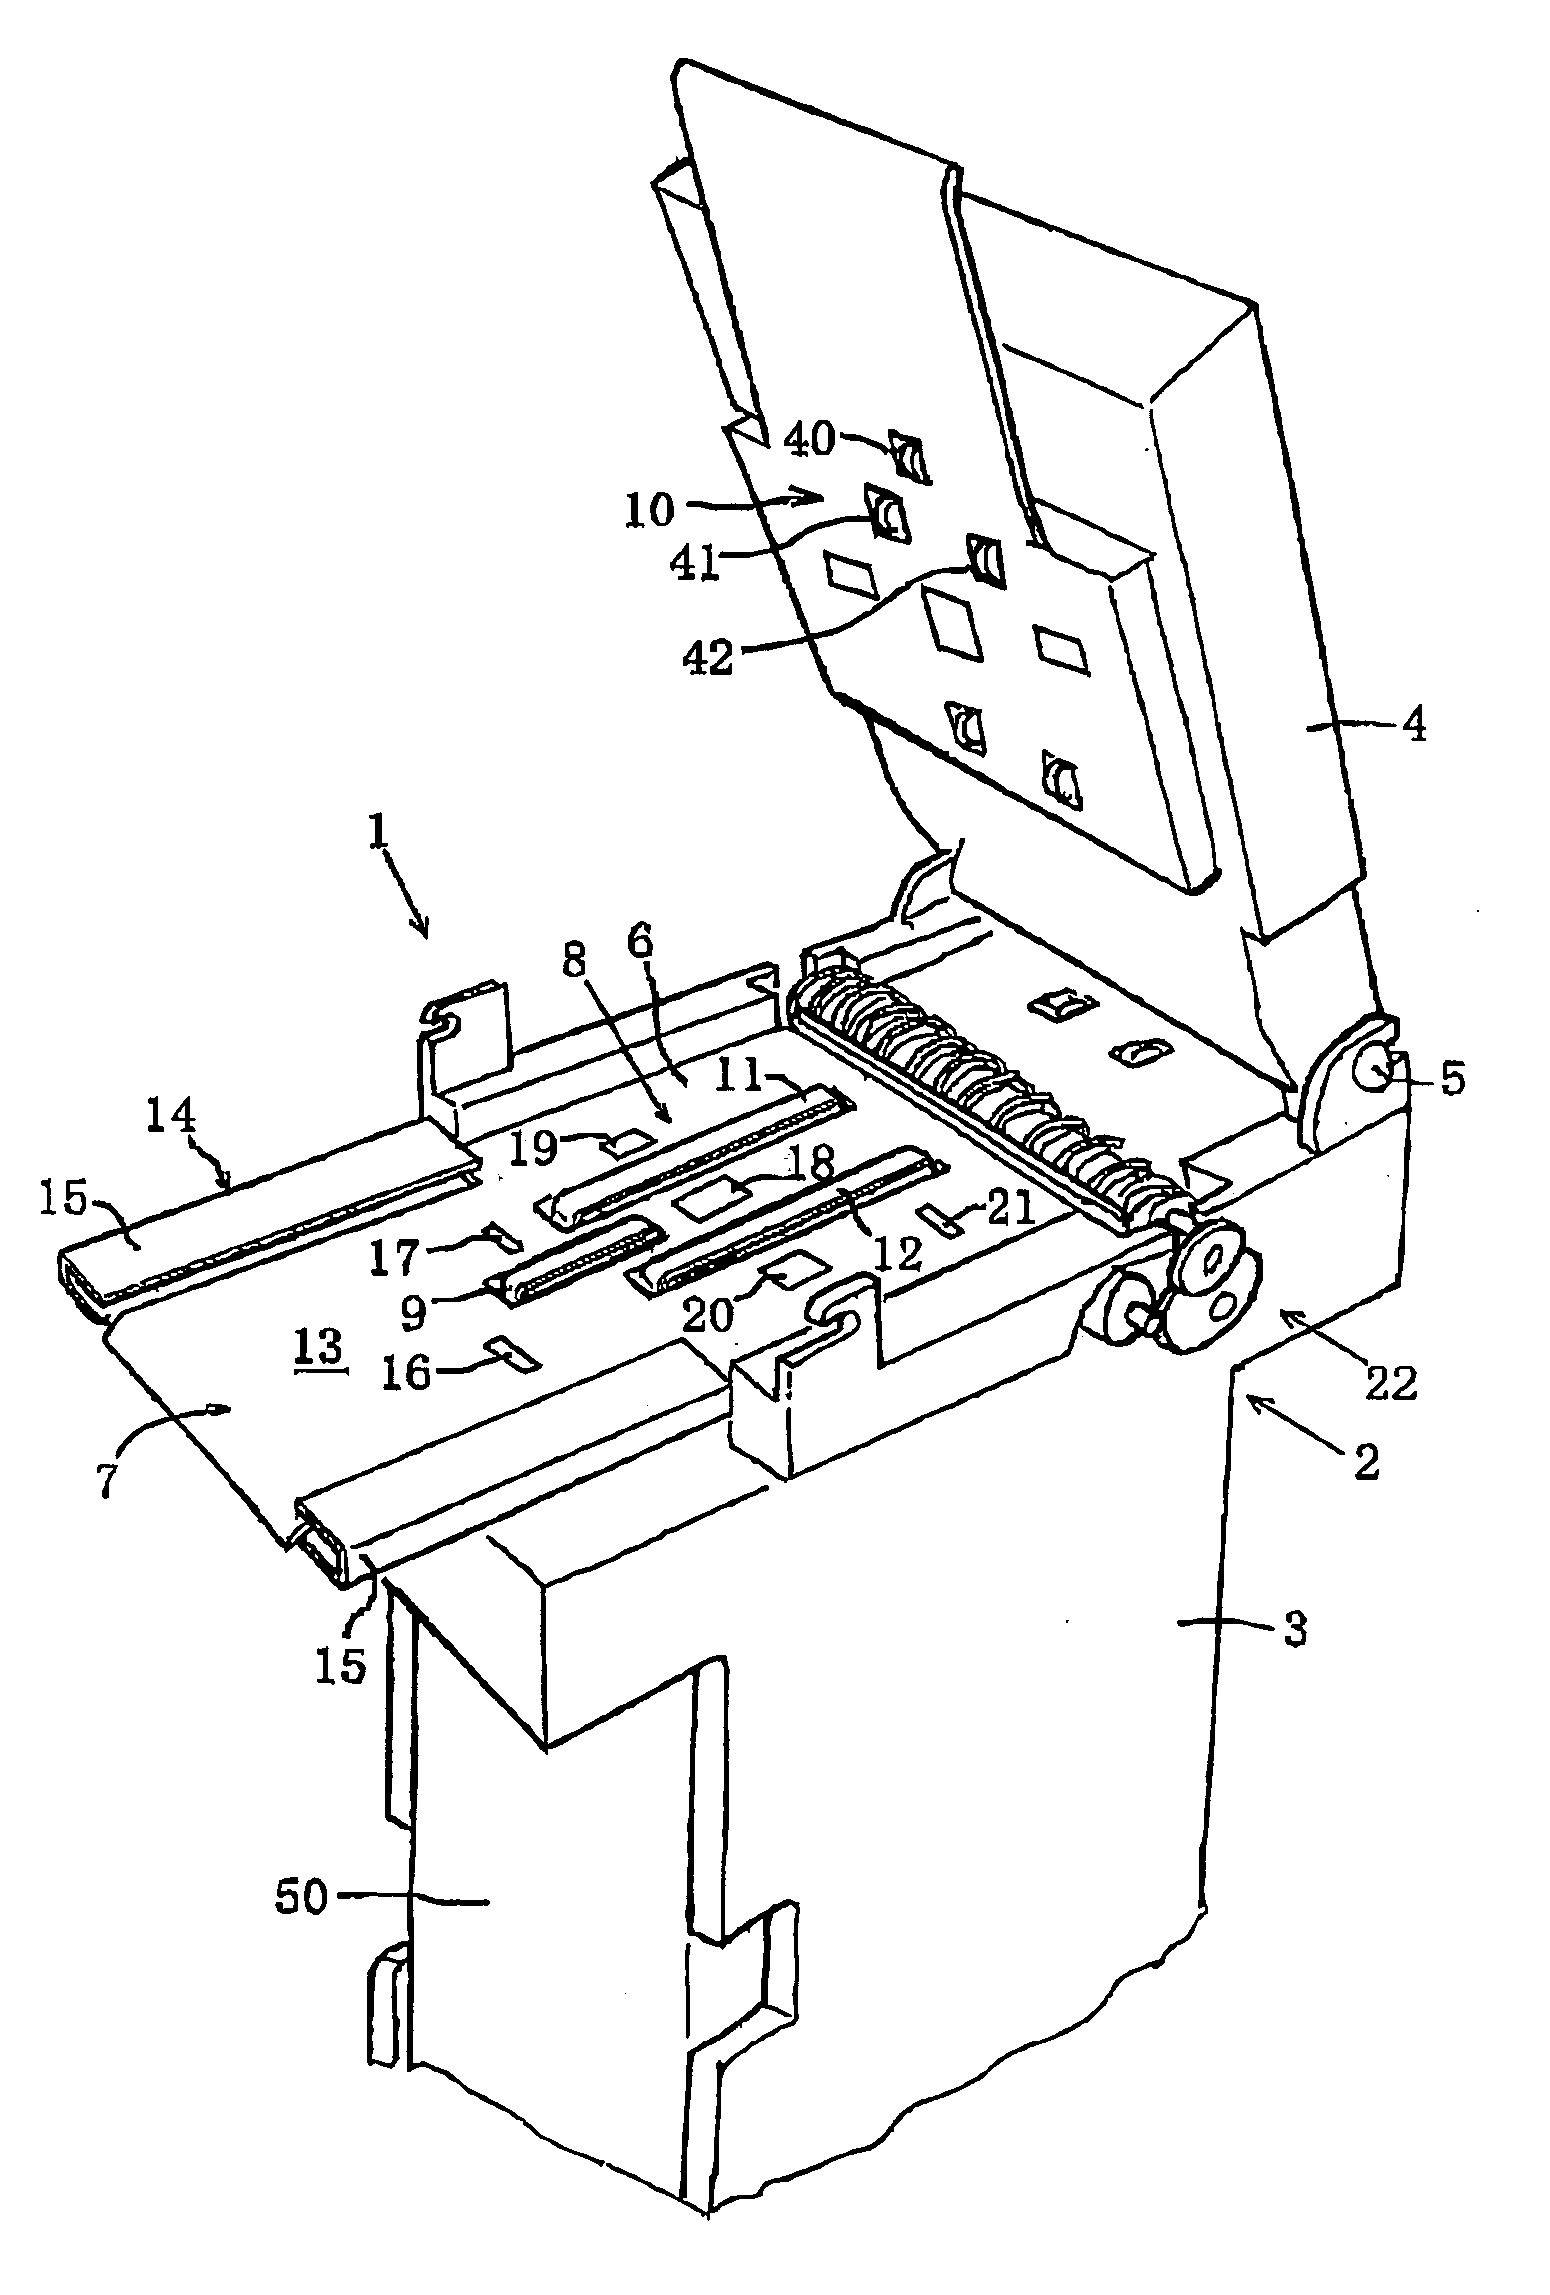 Bill validator with centering device